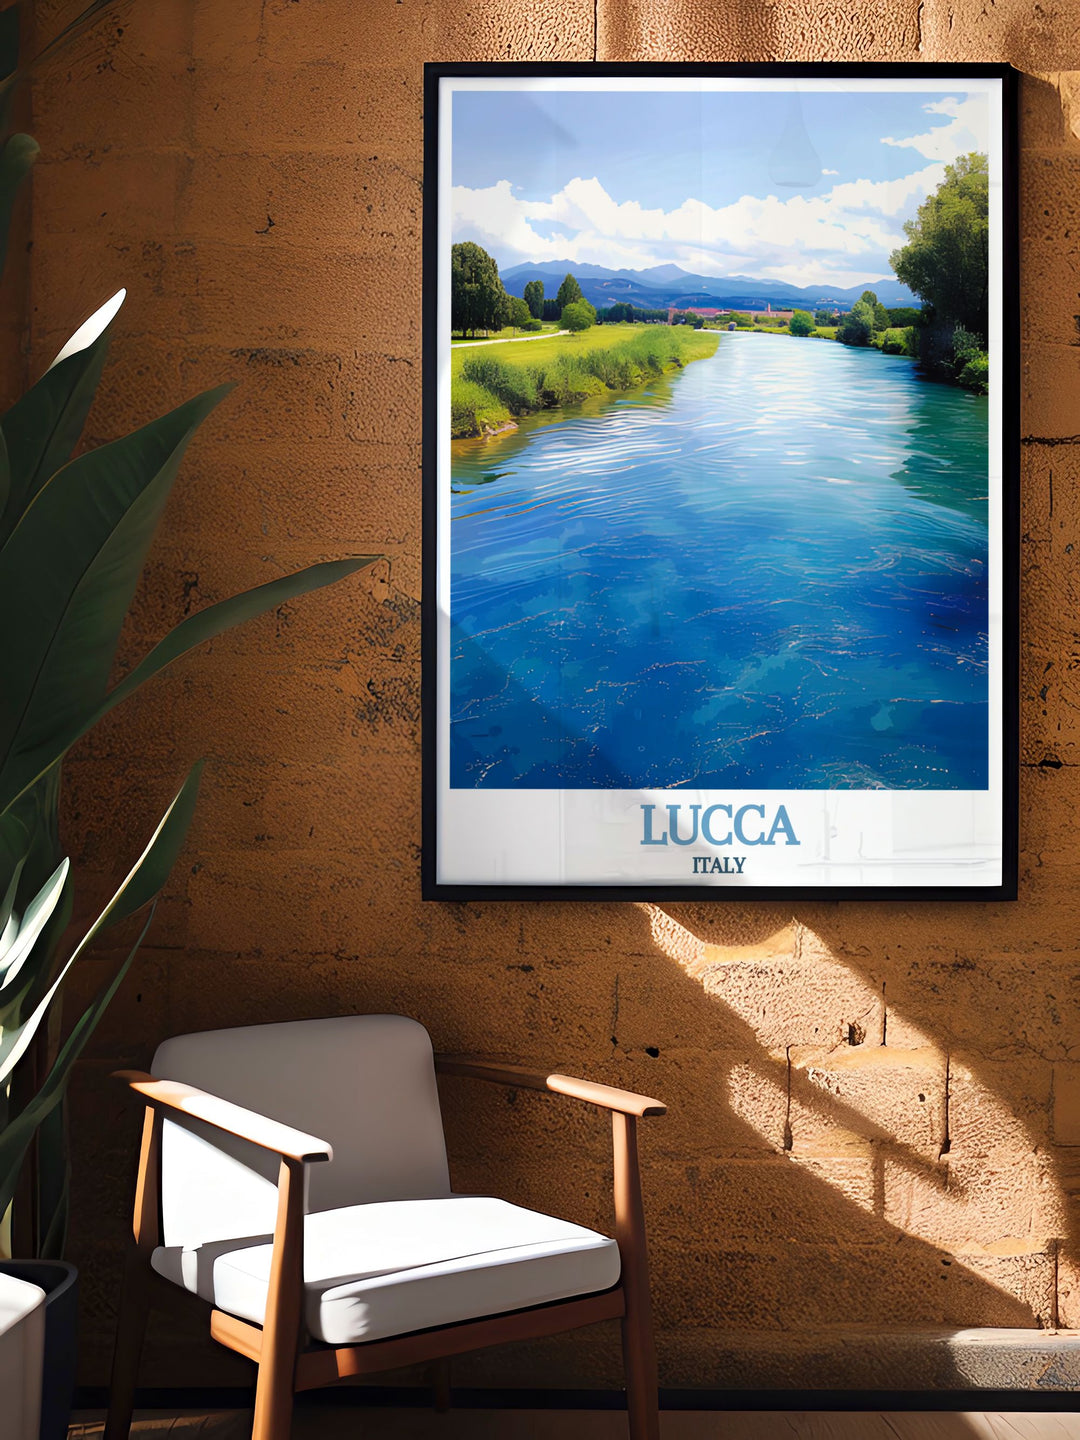 Lucca Poster and Serchio River stunning living room decor designed to bring sophistication and vibrant colors to your home or office perfect for anniversaries and birthdays